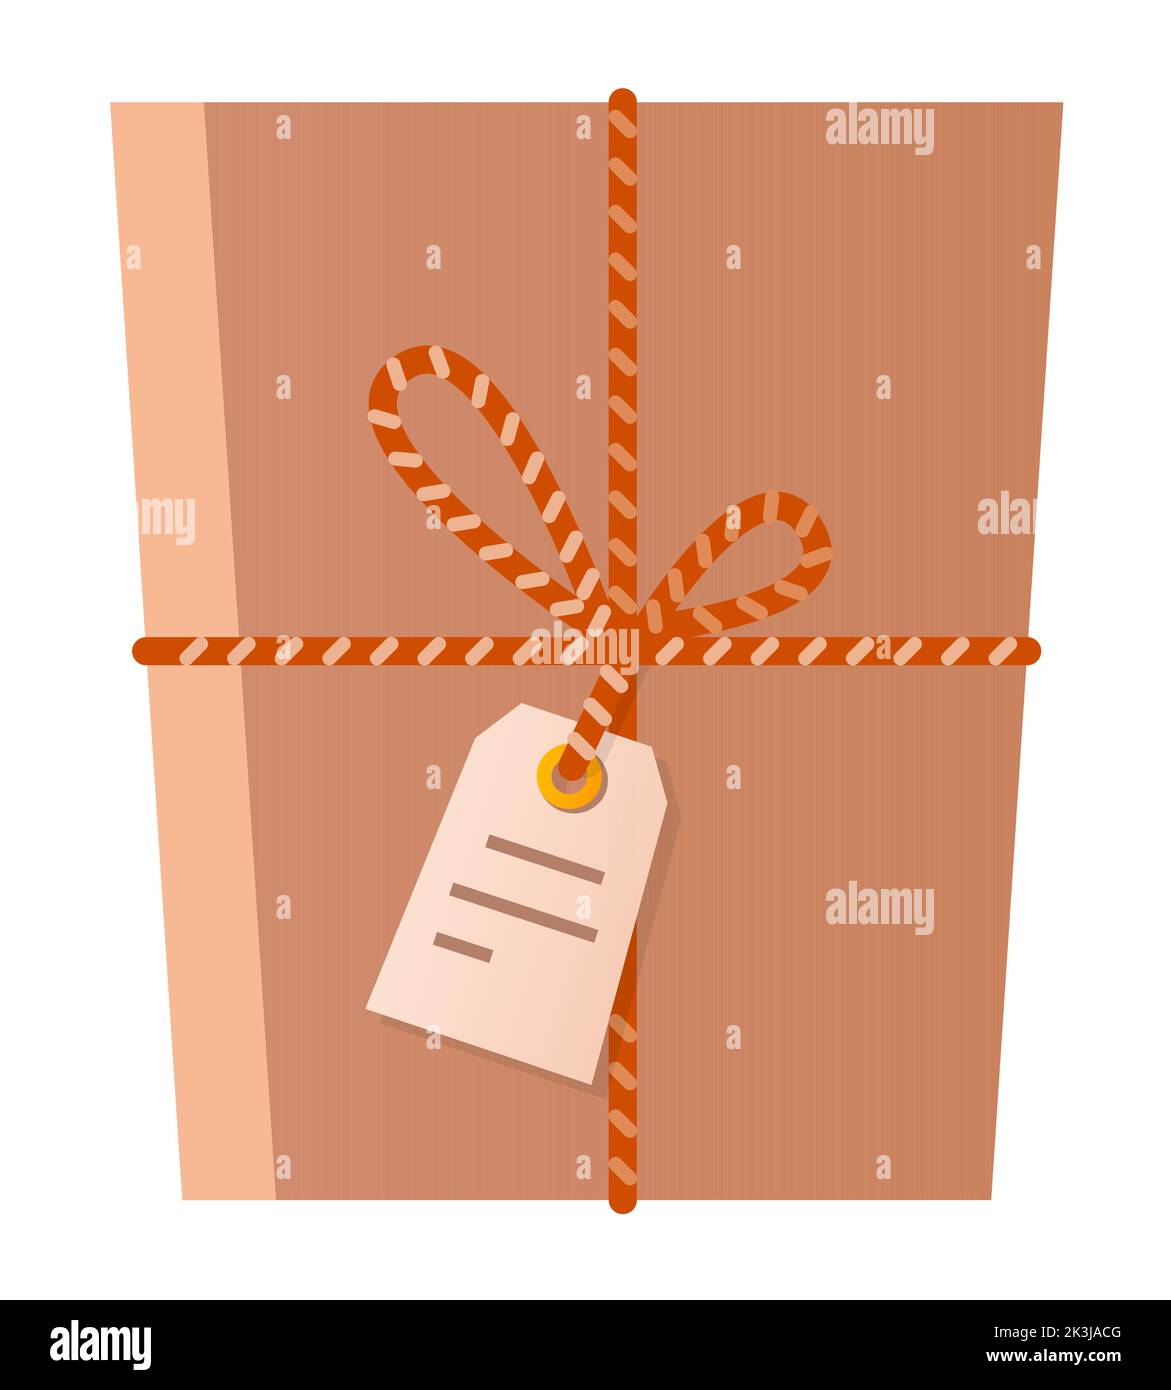 Gift wrap - modern flat design style single isolated image Stock Vector